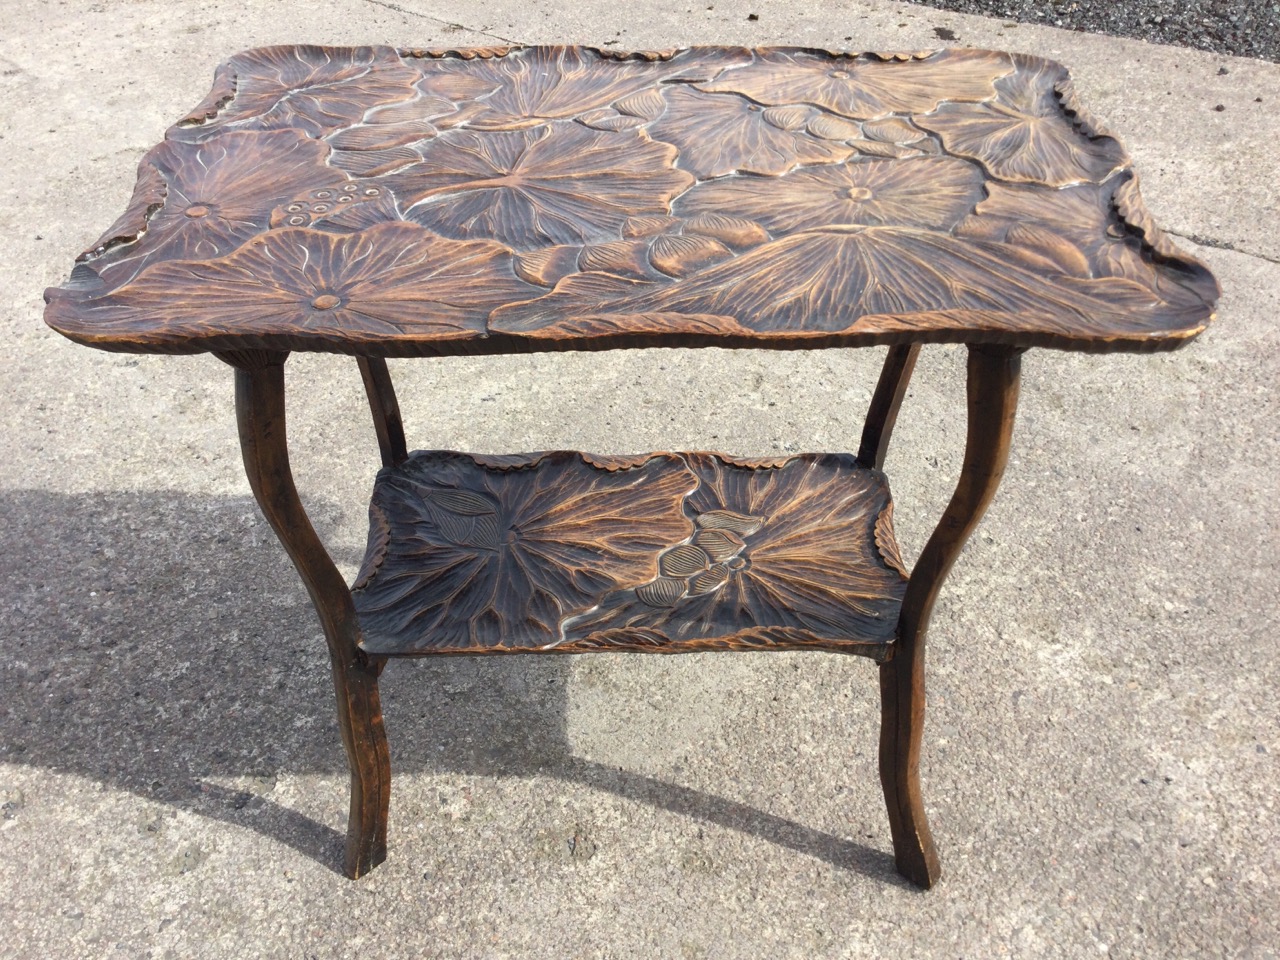 An early C20th Japanese hardwood occasional table with shaped rectangular top carved with lotus pads - Image 3 of 3